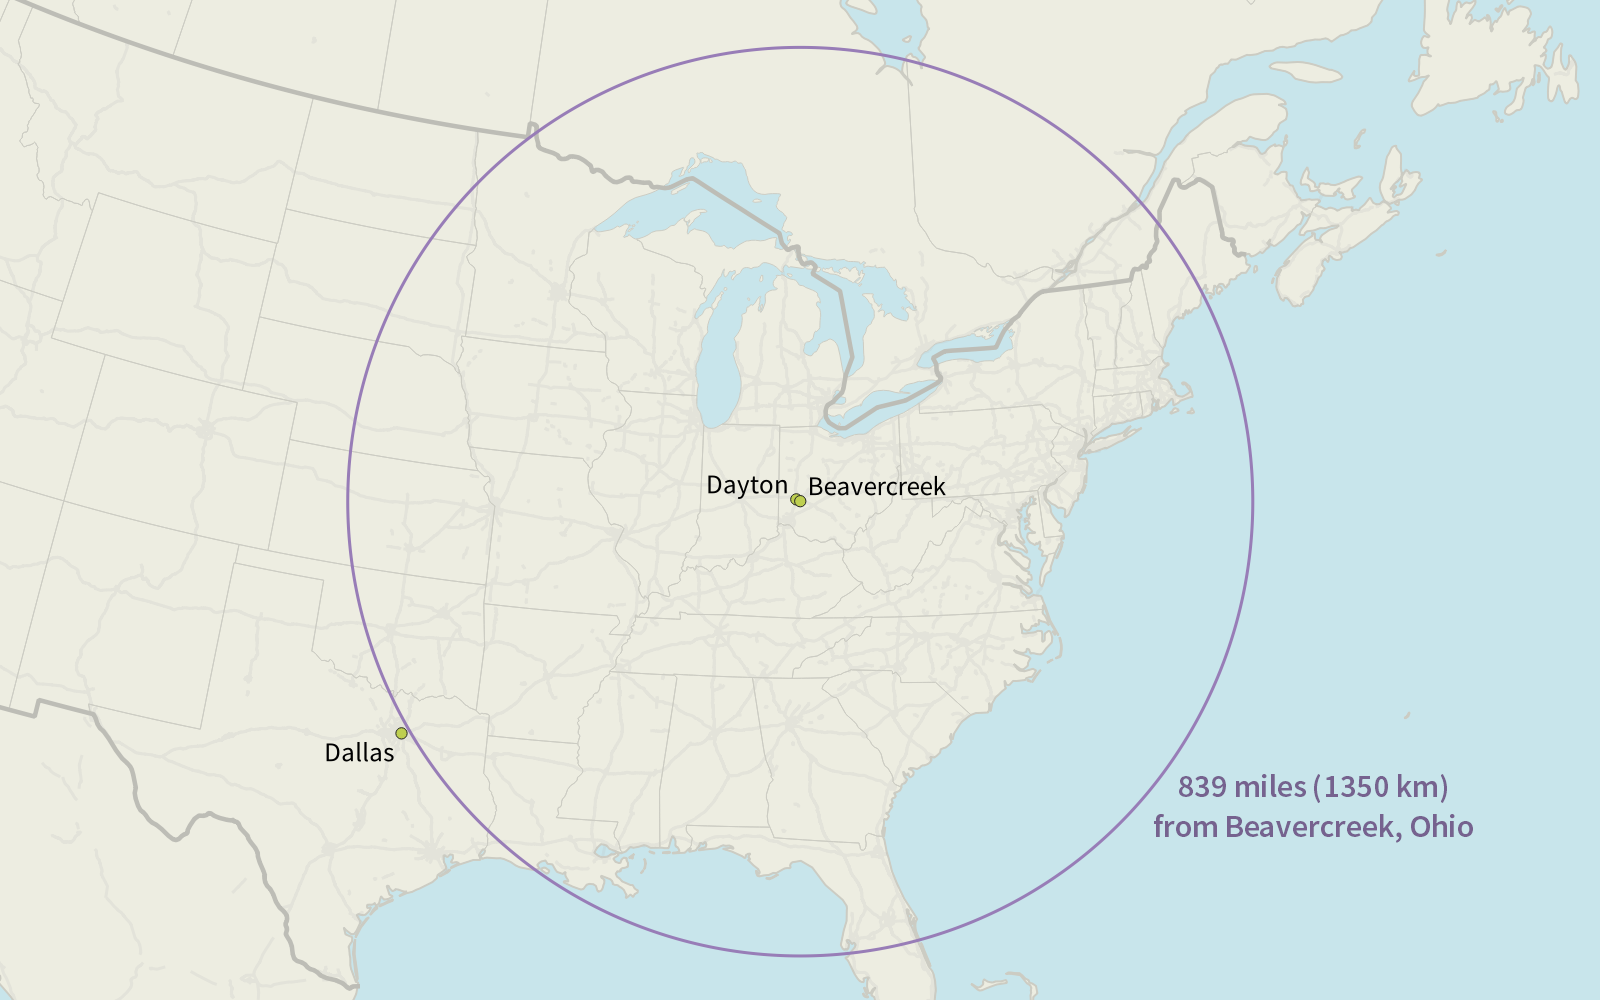 Map of the United states showing an 839 mile radius circle around Beavercreek, Ohio. Dayton OH and Dallas TX are also plotted; Dallas is just outside of the circle.